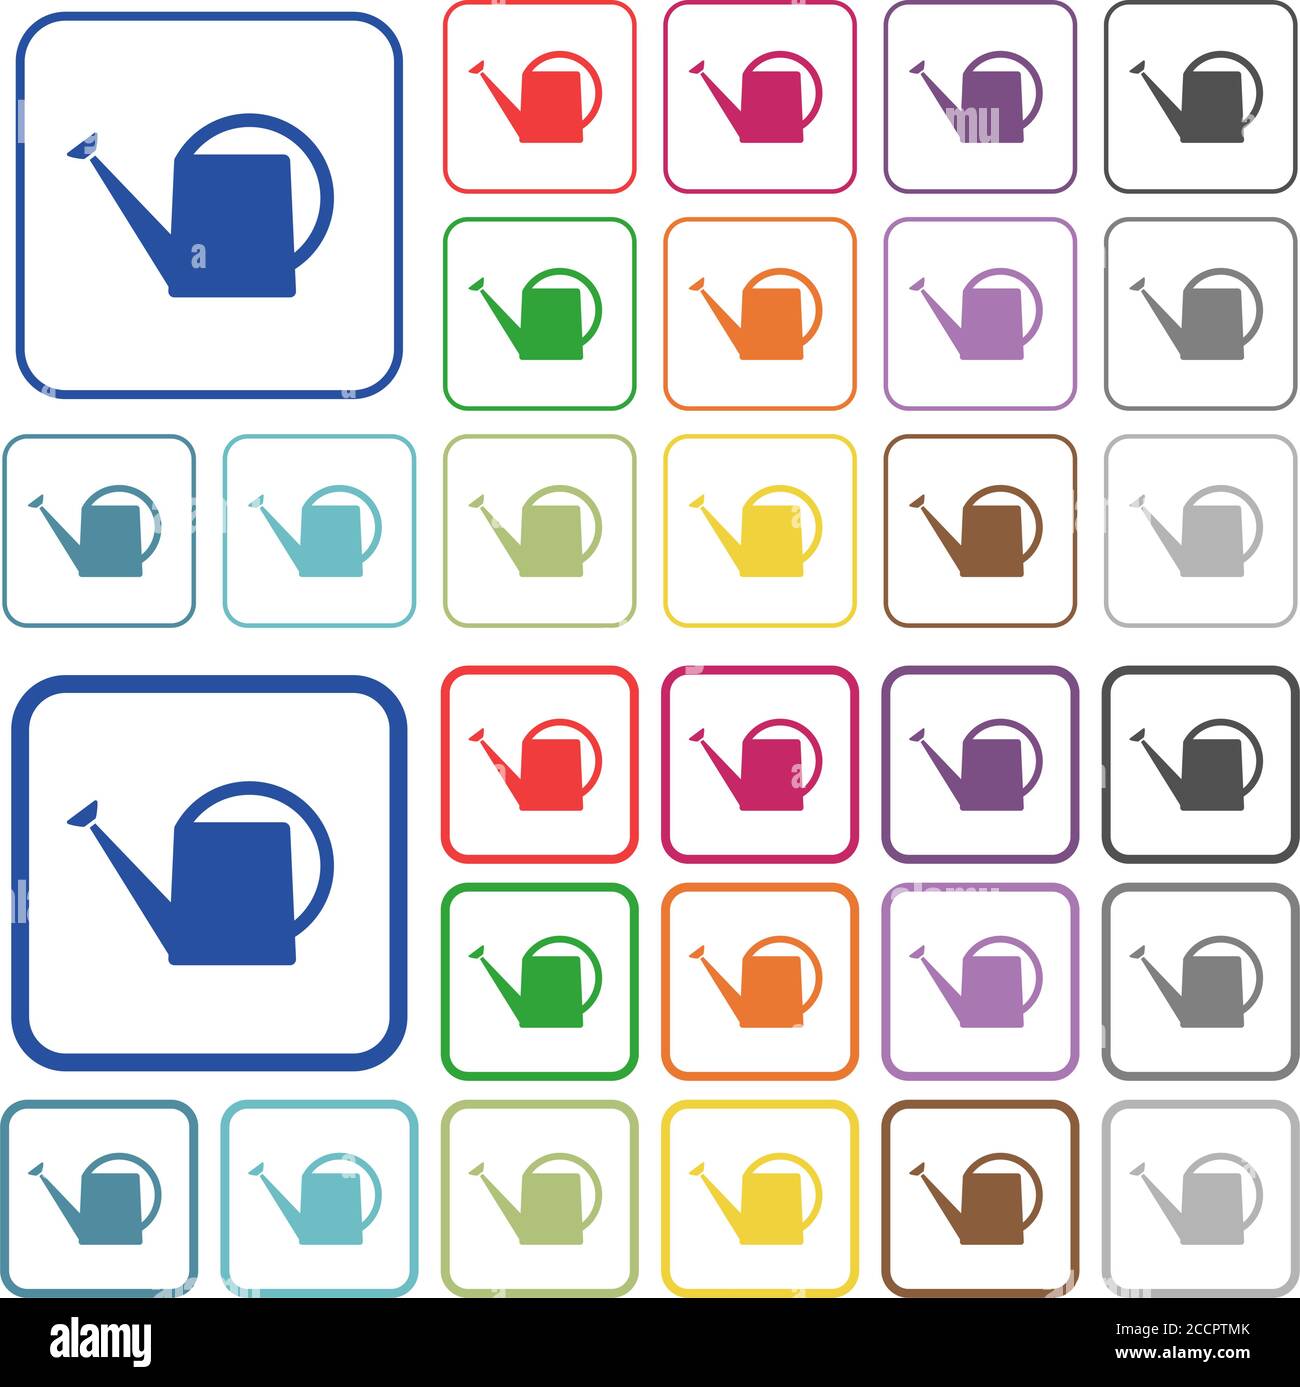 Watering can color flat icons in rounded square frames. Thin and thick versions included. Stock Vector